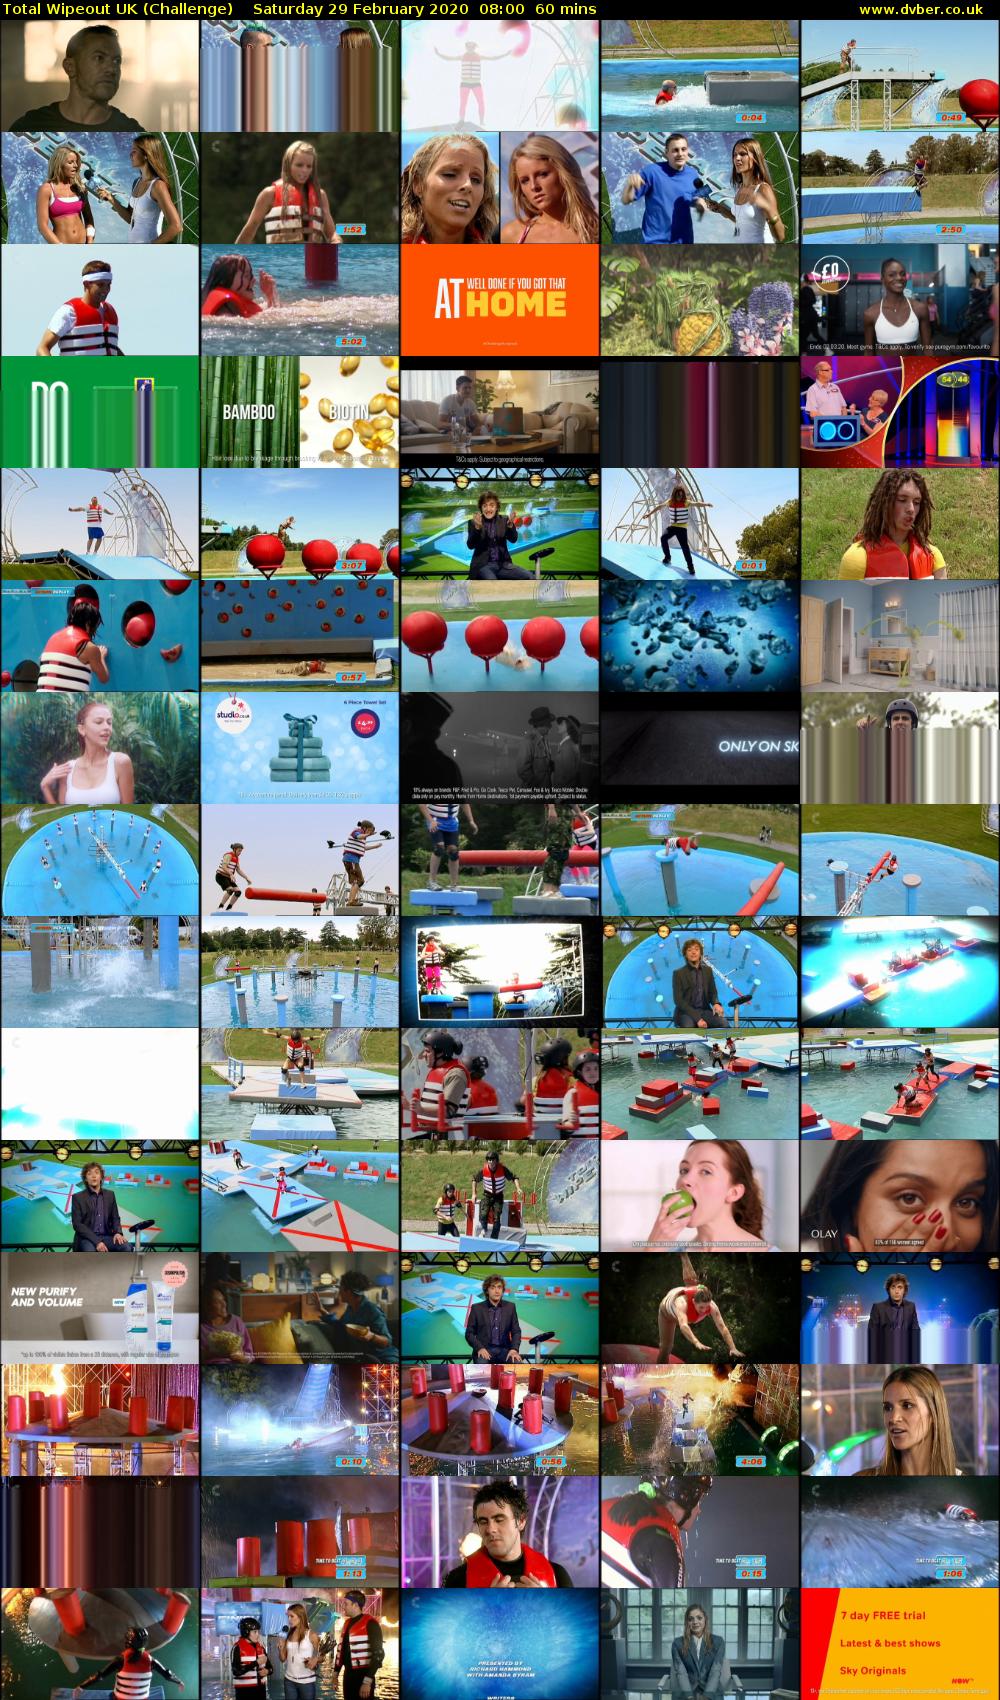 Total Wipeout UK (Challenge) Saturday 29 February 2020 08:00 - 09:00